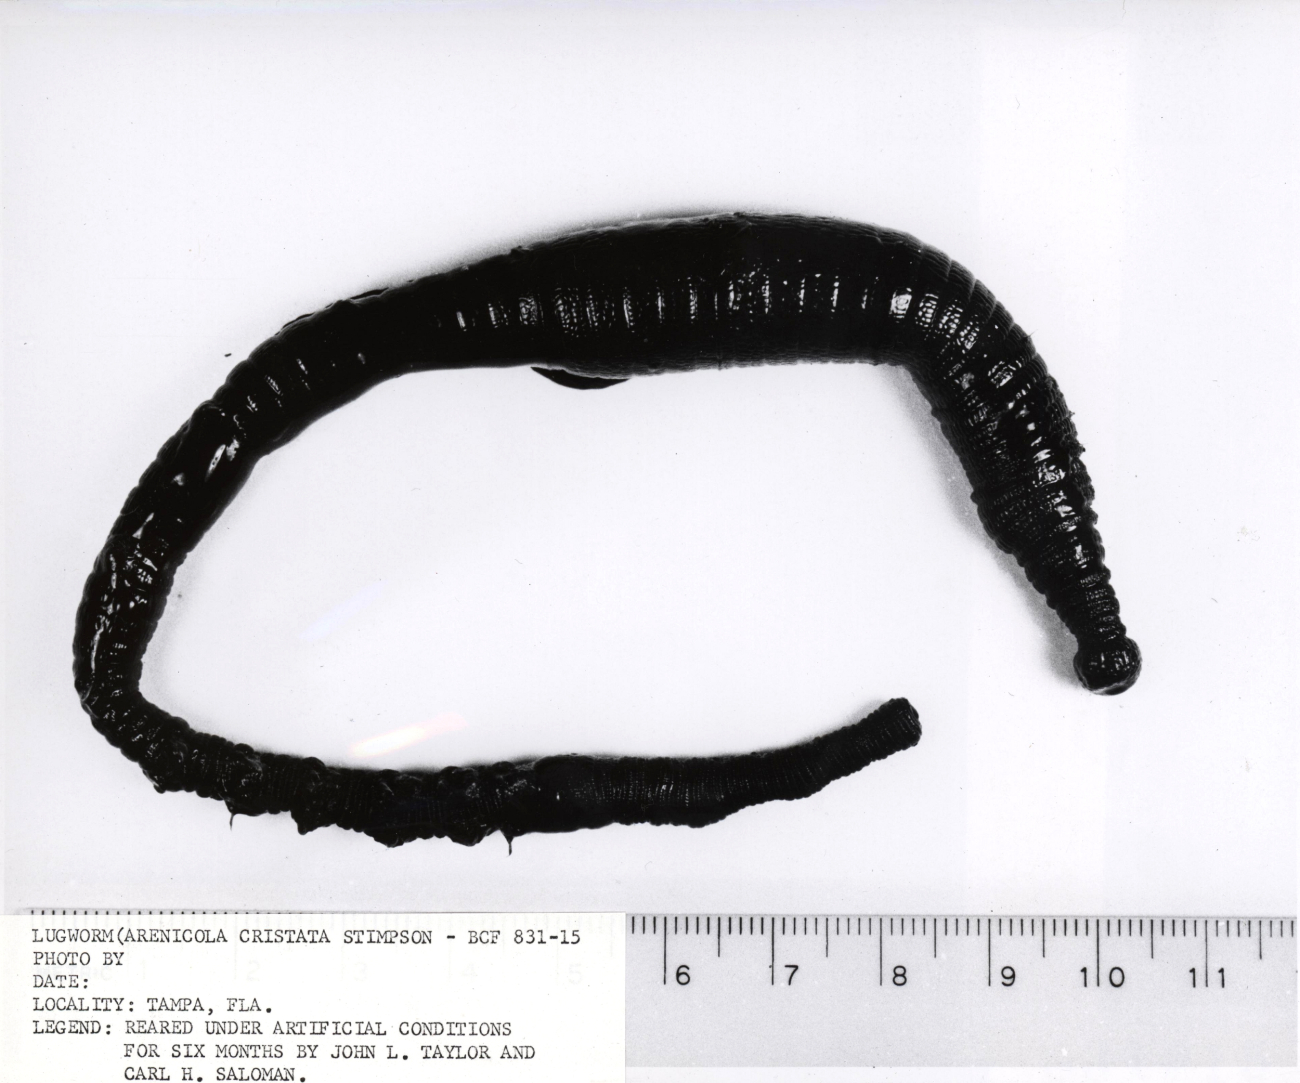 The lugworm (Arenicola cristata) from Tampa Bay reared under artificialconditions for six months